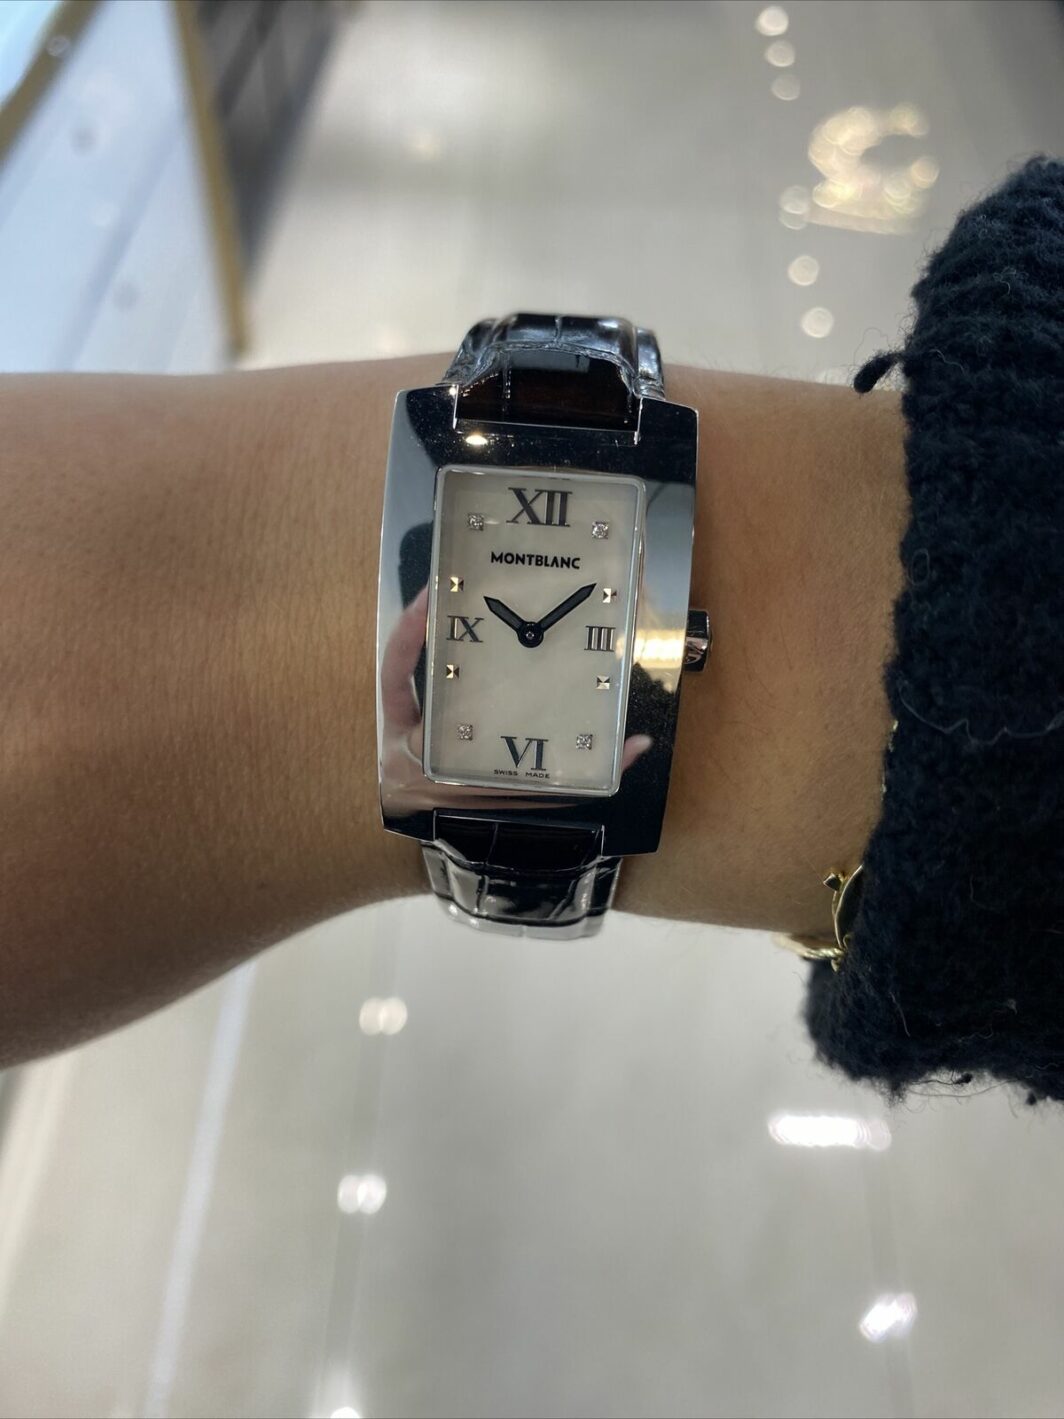 a woman's wrist with a watch on it